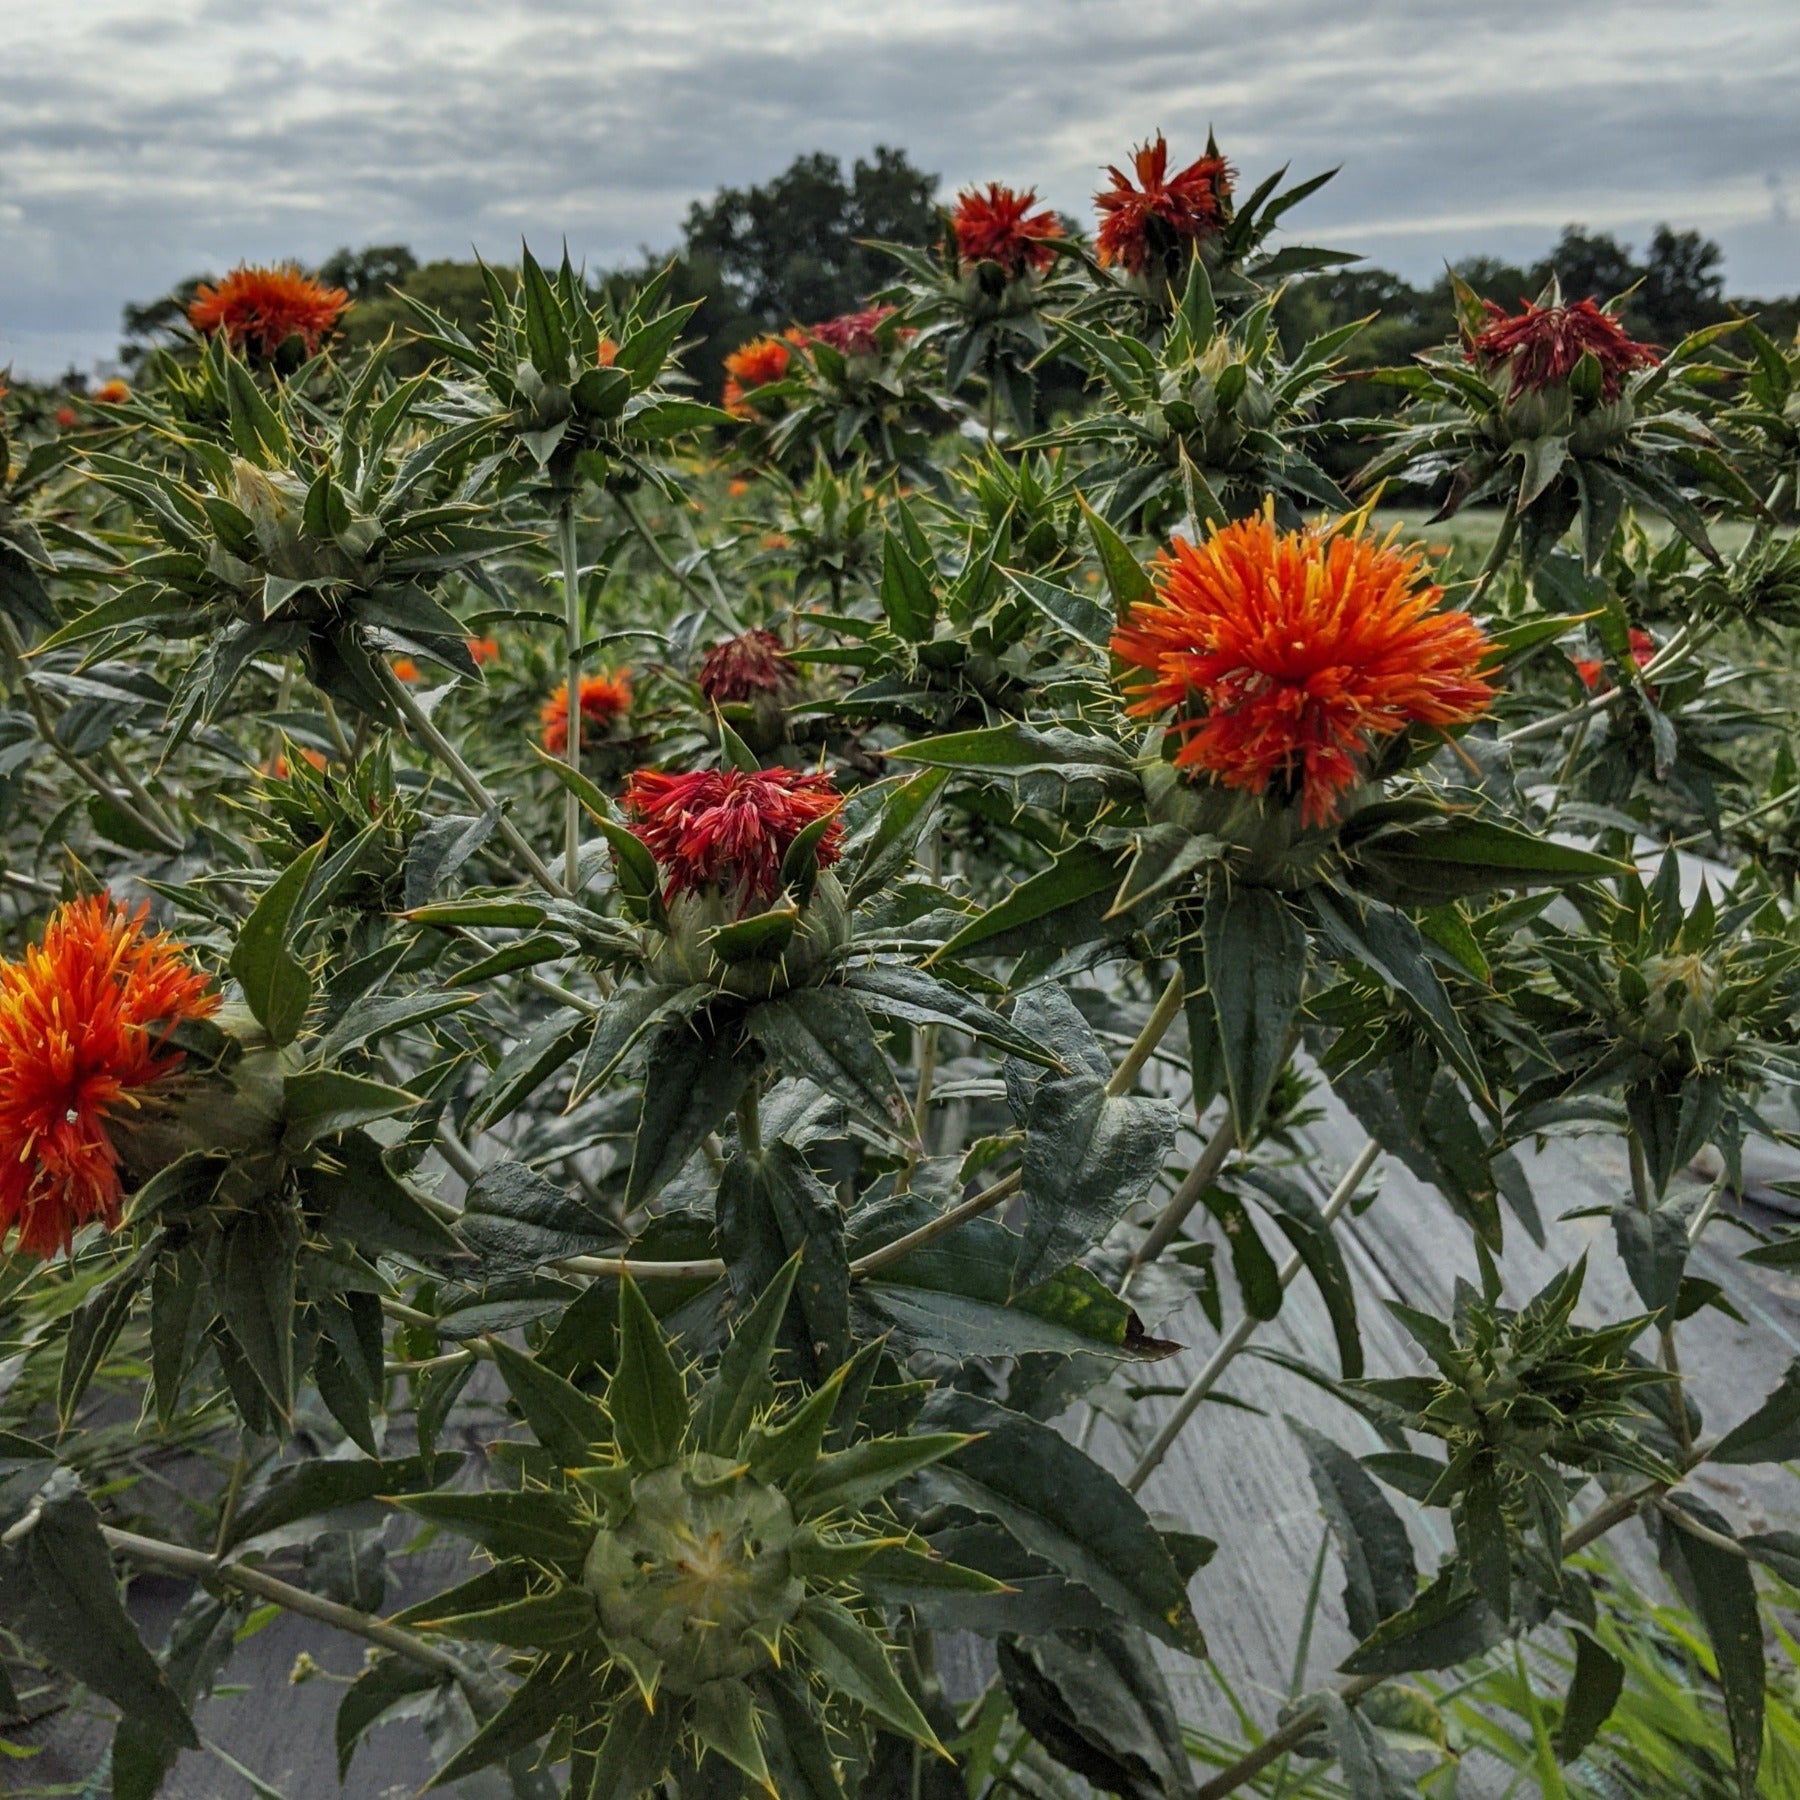 A lorenzo trussoni heirloom safflower plant in the field under cloudy skies